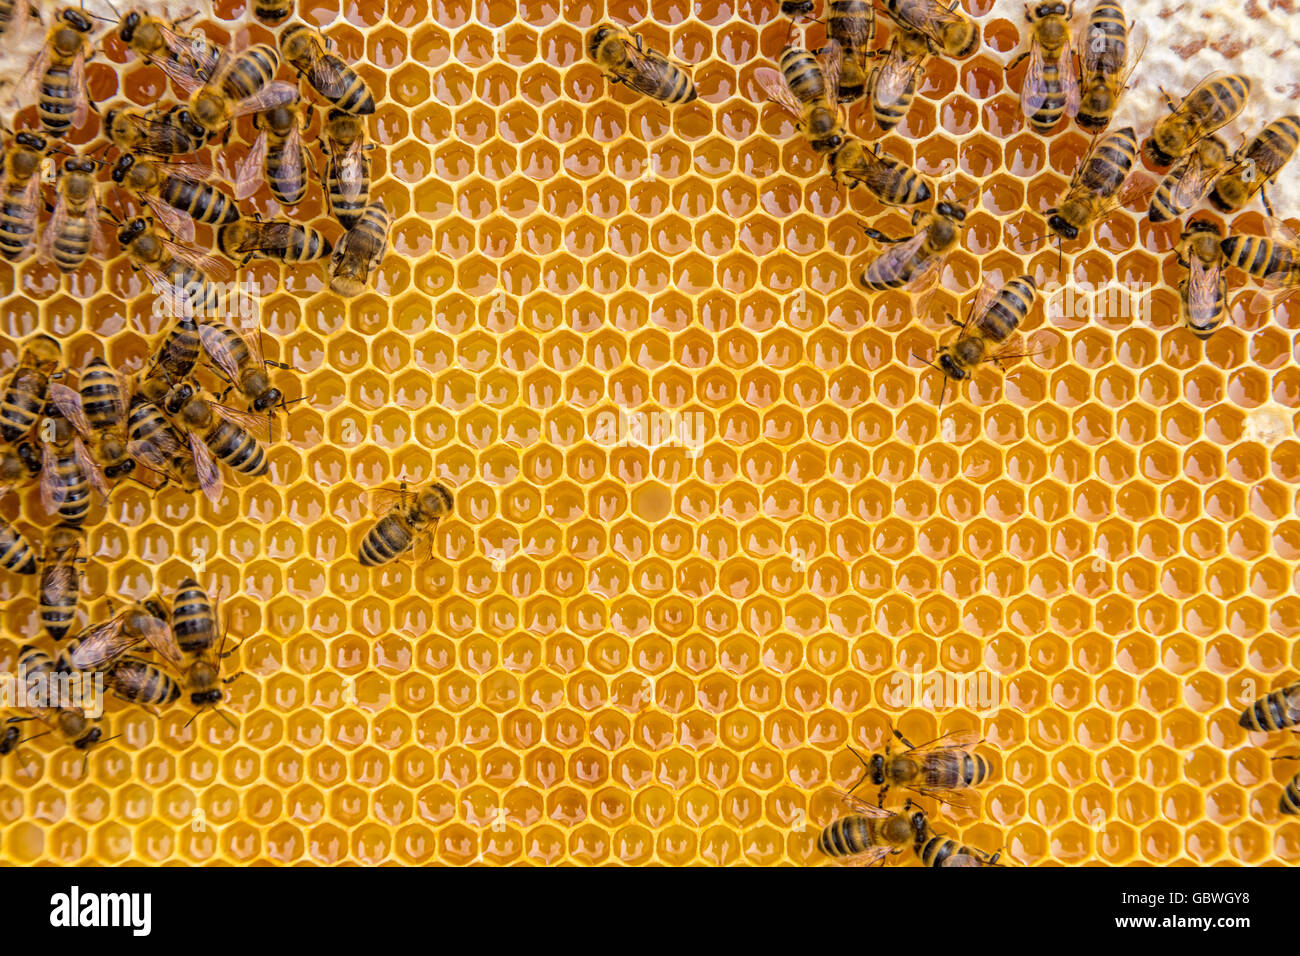 Close up view of the working bees on honey cells, copyspace for text Stock Photo